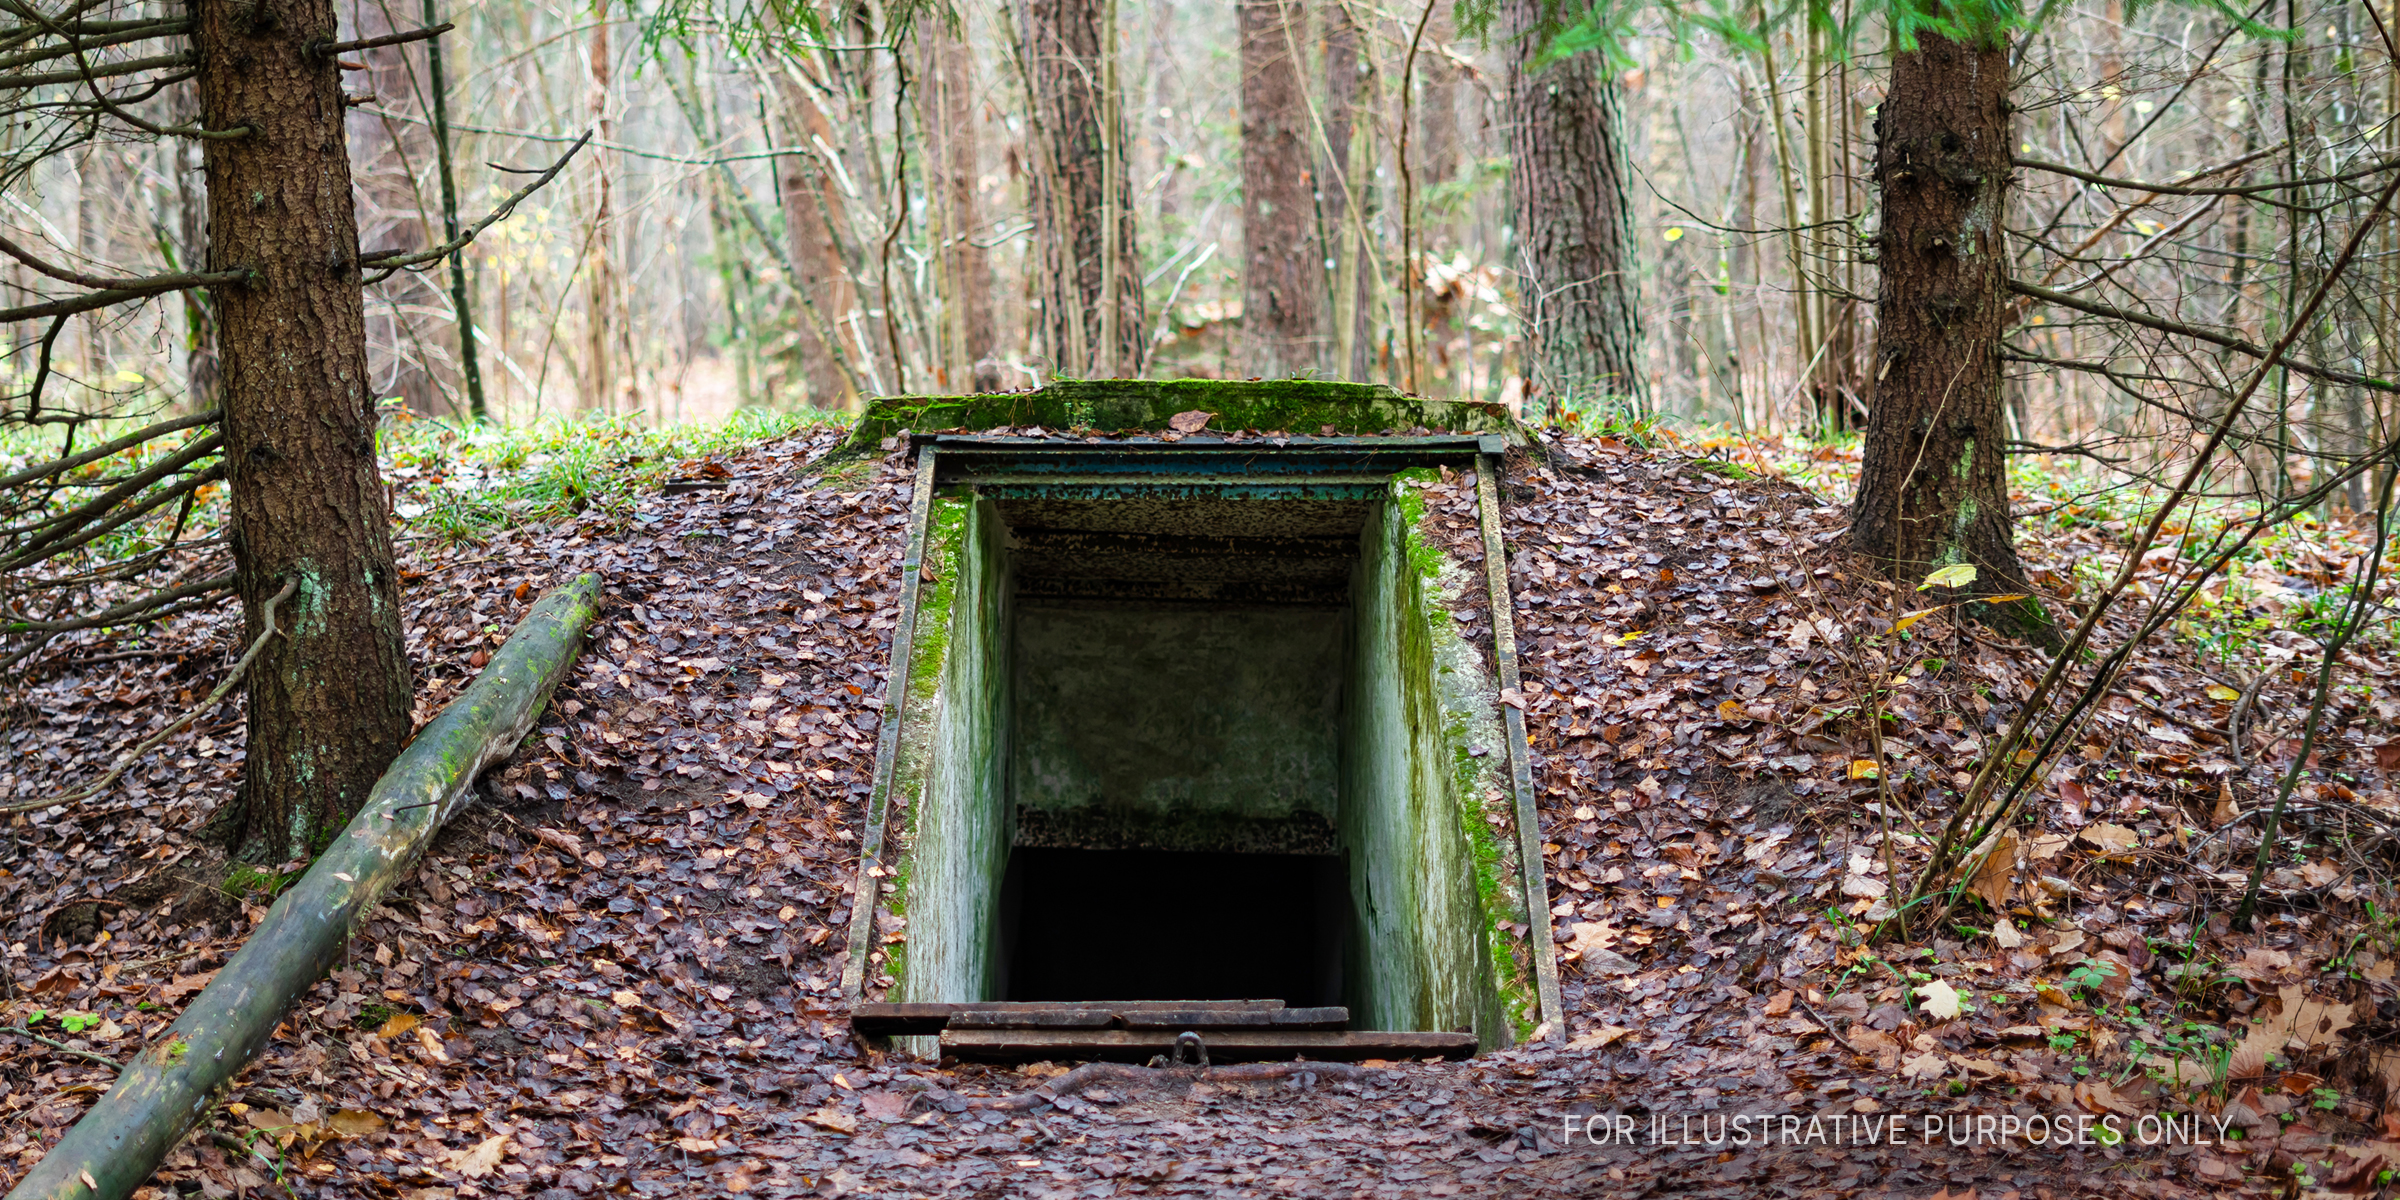 Entrance to underground bunker. | Source: Getty Images